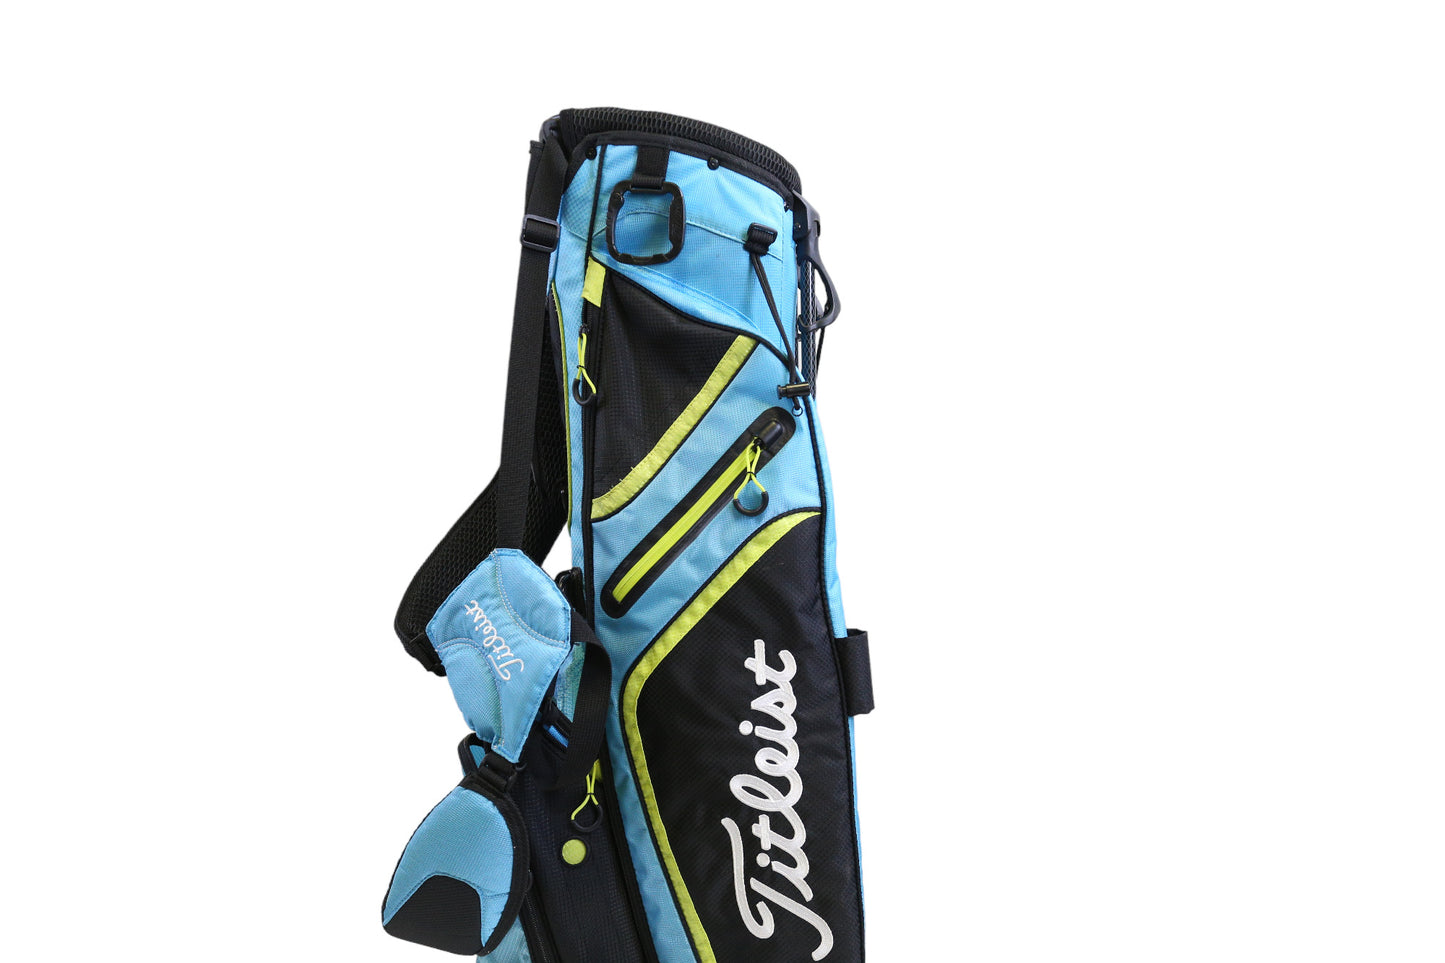 Titleist Blue/Green Stand Bag 3 Dividers 5 Pockets Rain Cover